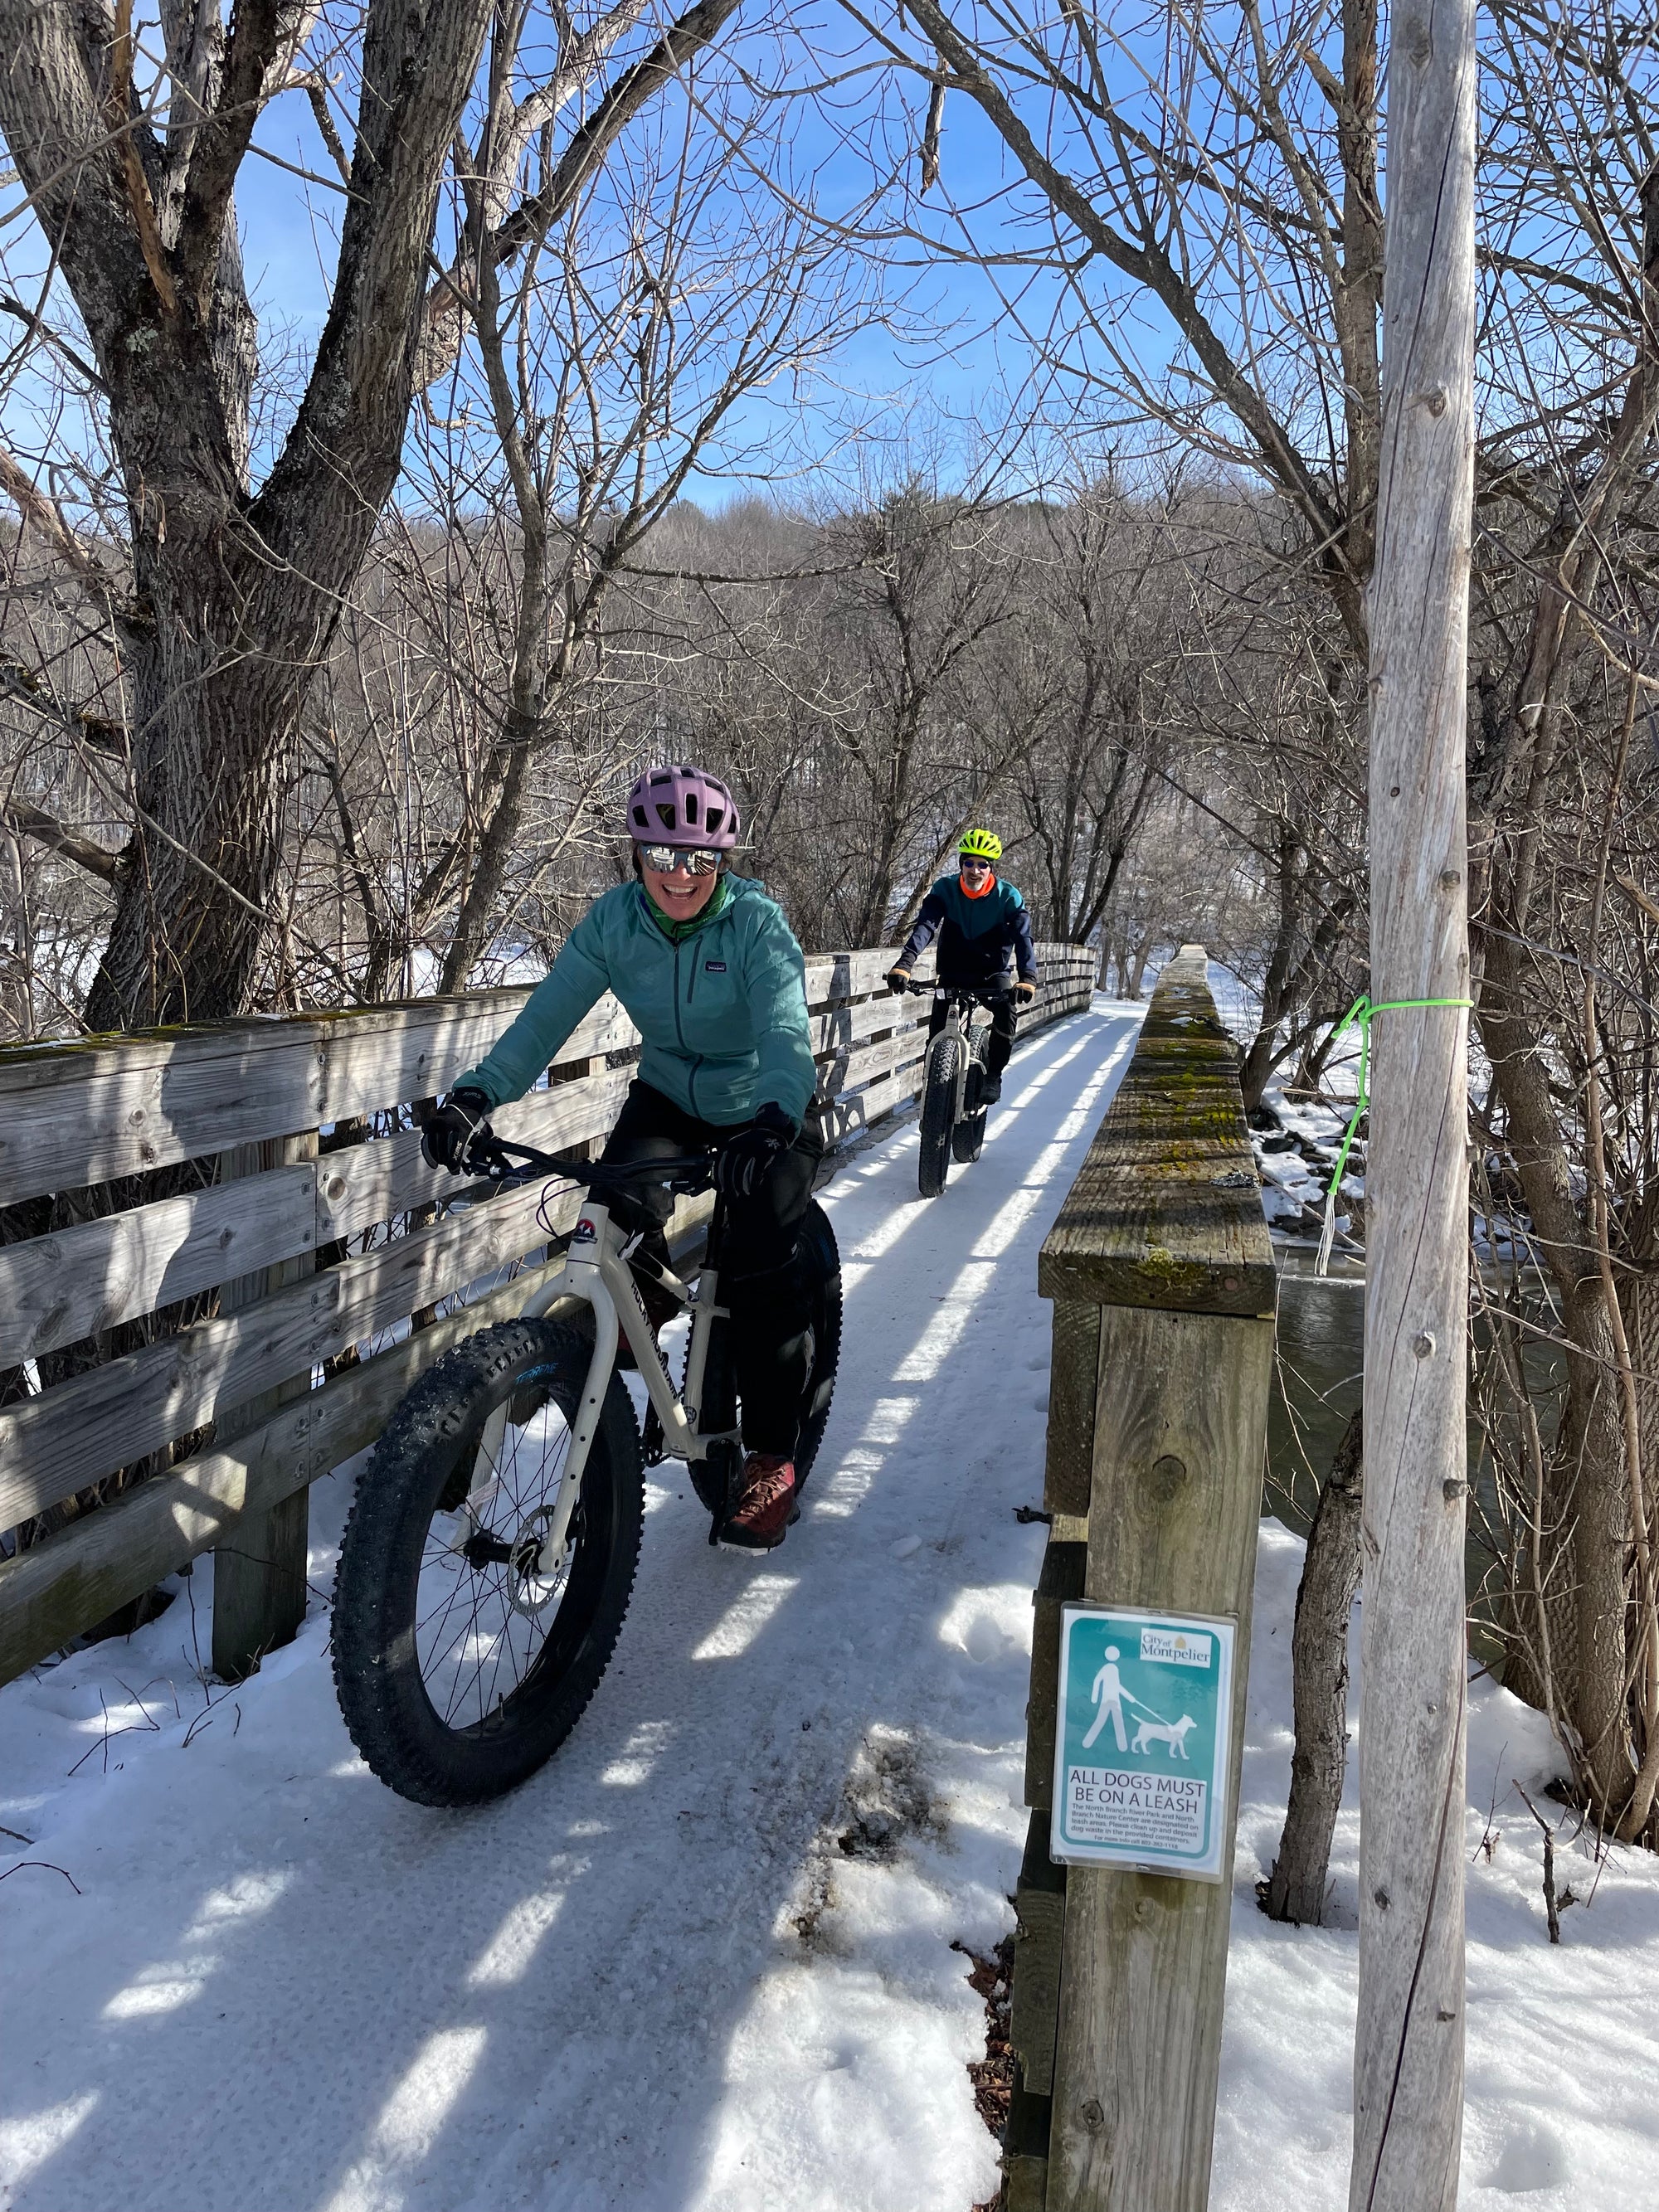 Two fat bikers riding single file on a wooden bridge in late winter